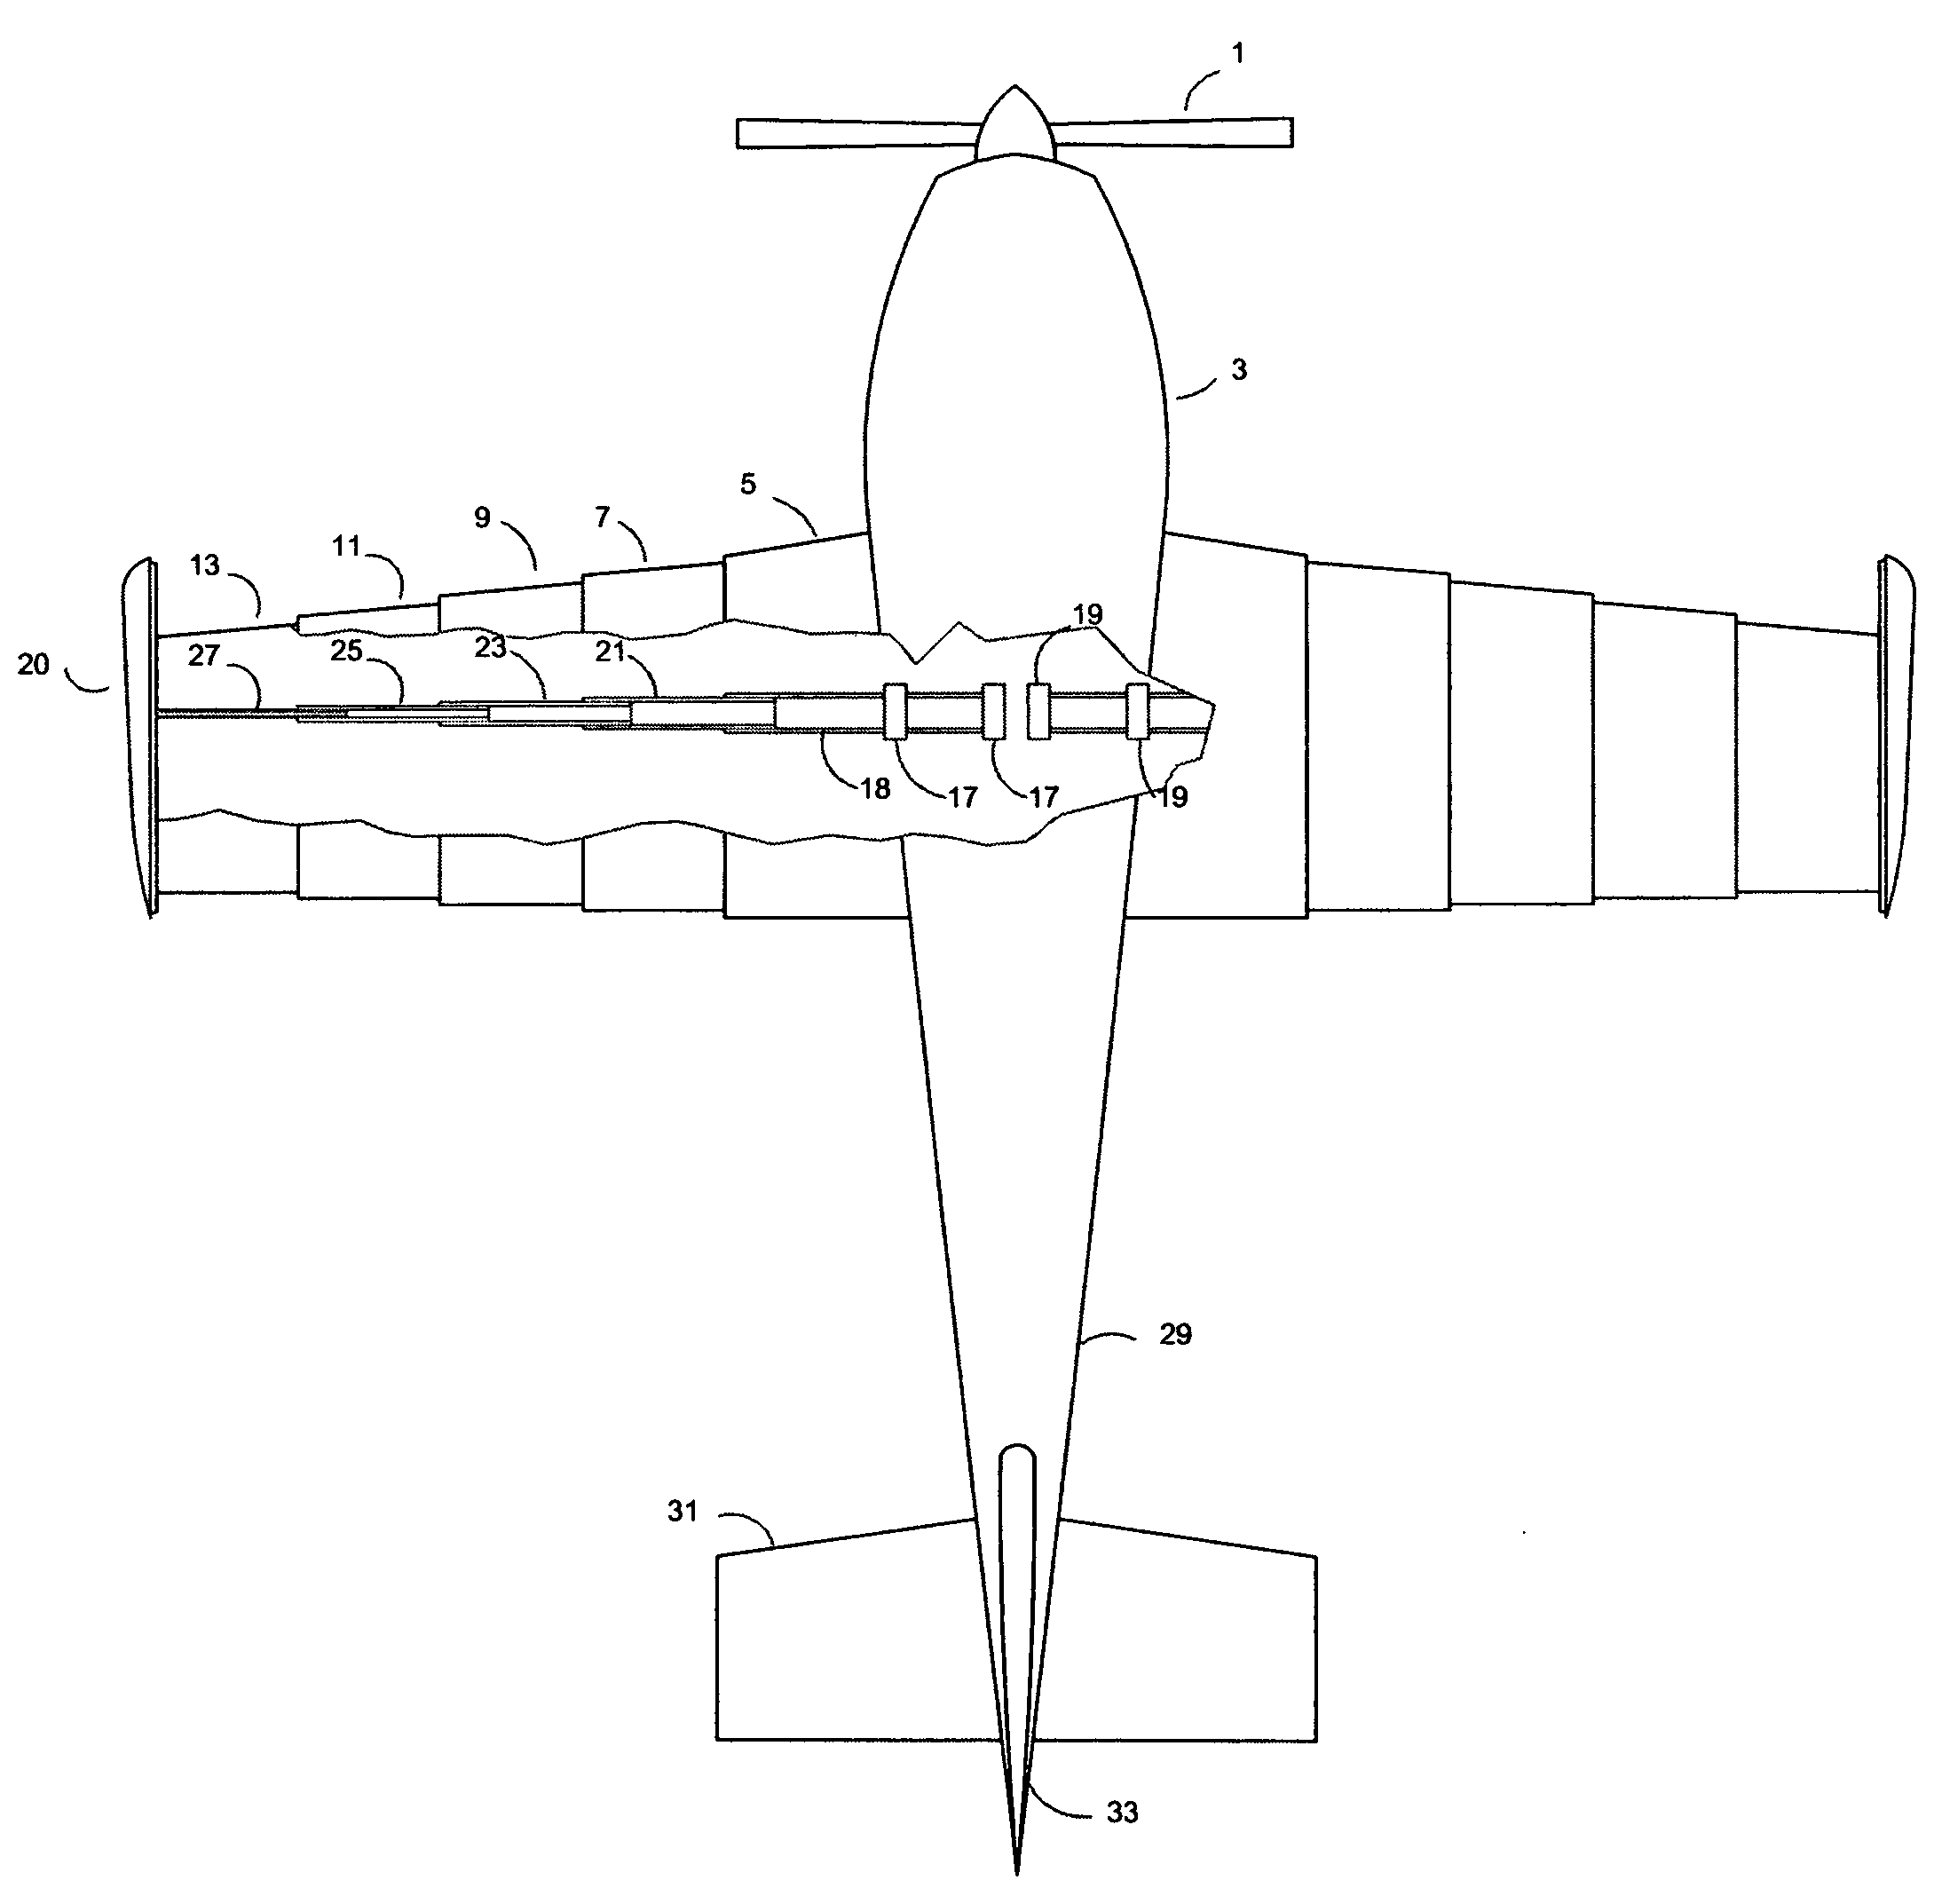 Telescoping wing and airfoil control mechanism